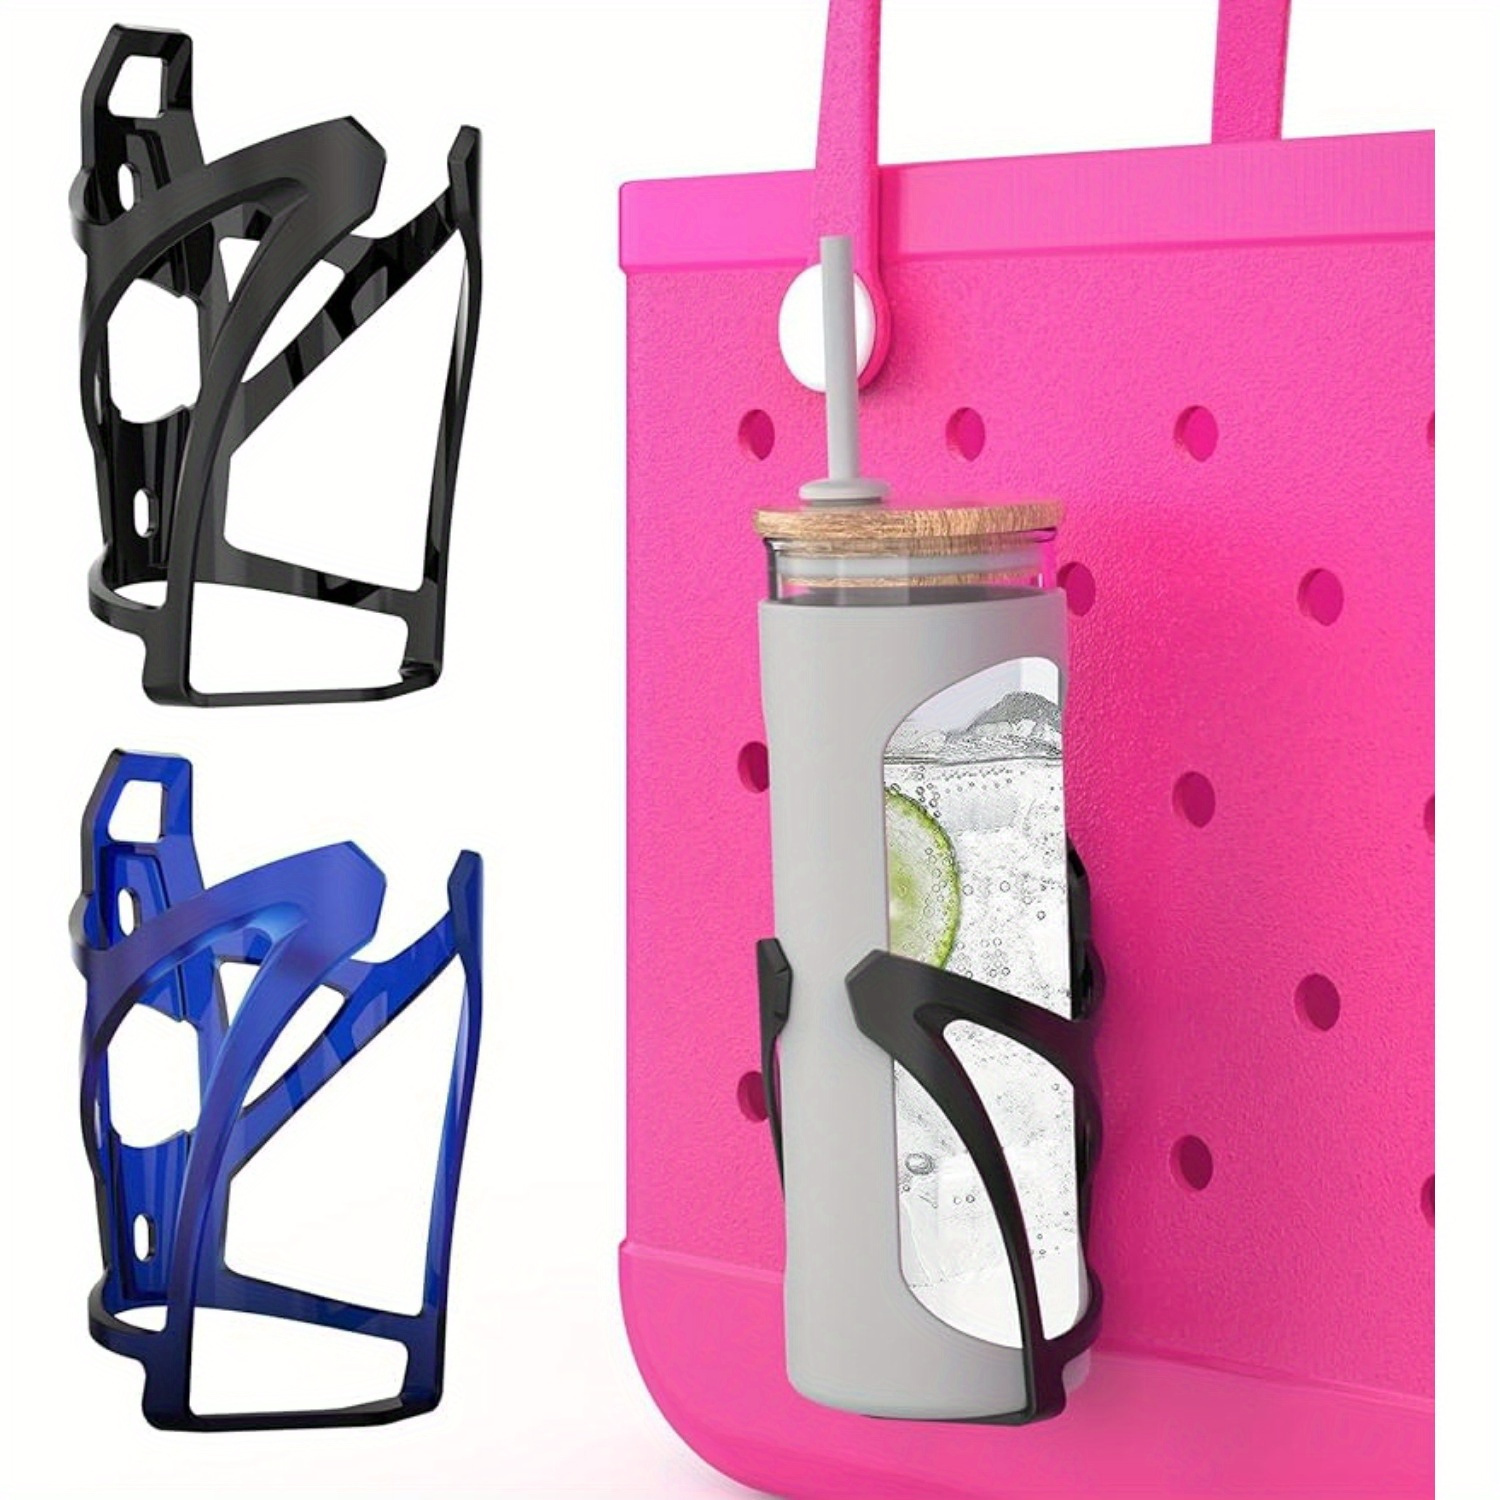 

1pc Cup Holder For , Drink Holder Accessories For Bags, Insert Charm Water Bottle Holder Compatible With , Adjustable Cup Holder Attachment For Beach Hole Bags